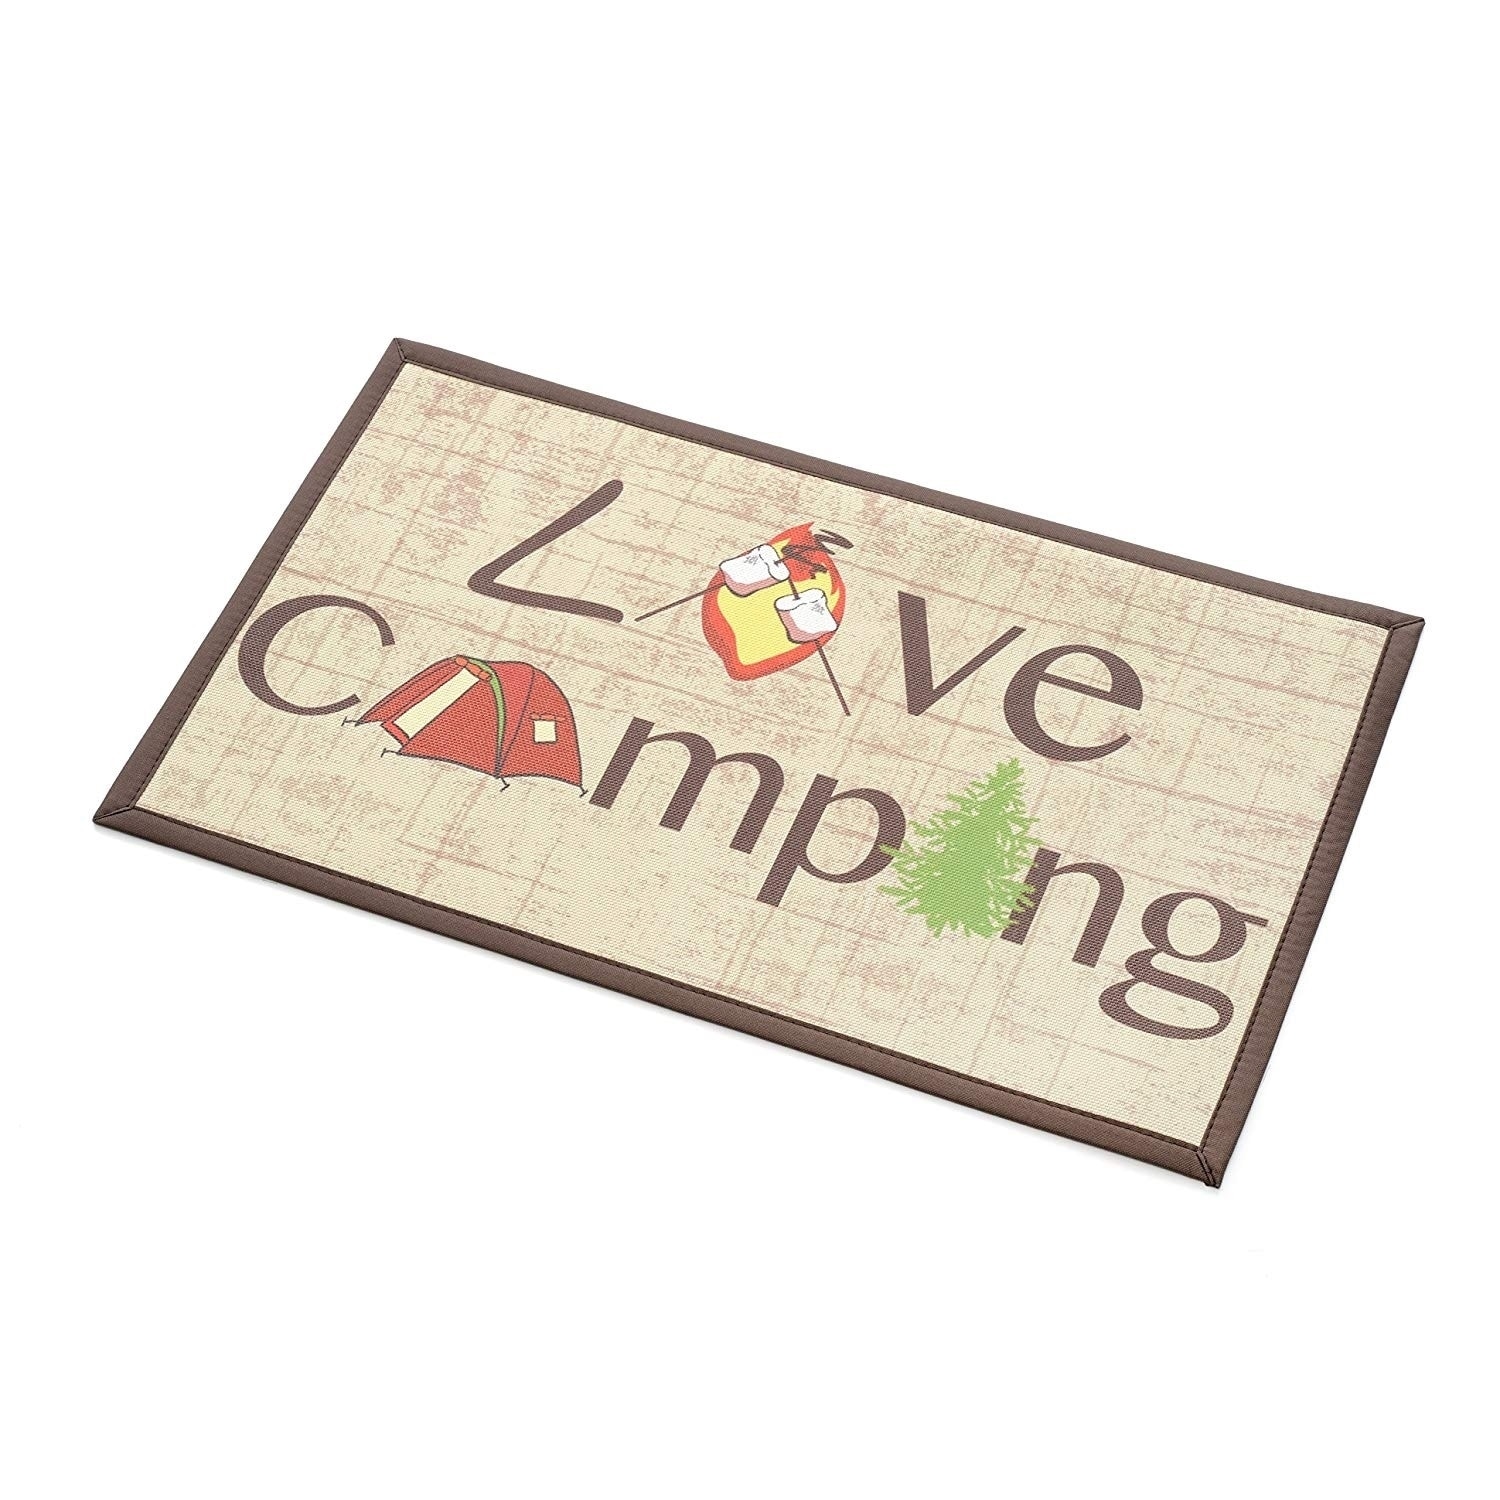 https://ak1.ostkcdn.com/images/products/17995008/Stephan-Roberts-Recycled-Rubber-Door-Mat-18-x-30-Love-Camping-2fb5c52b-ce3d-4b07-9a41-8be273040af1.jpg